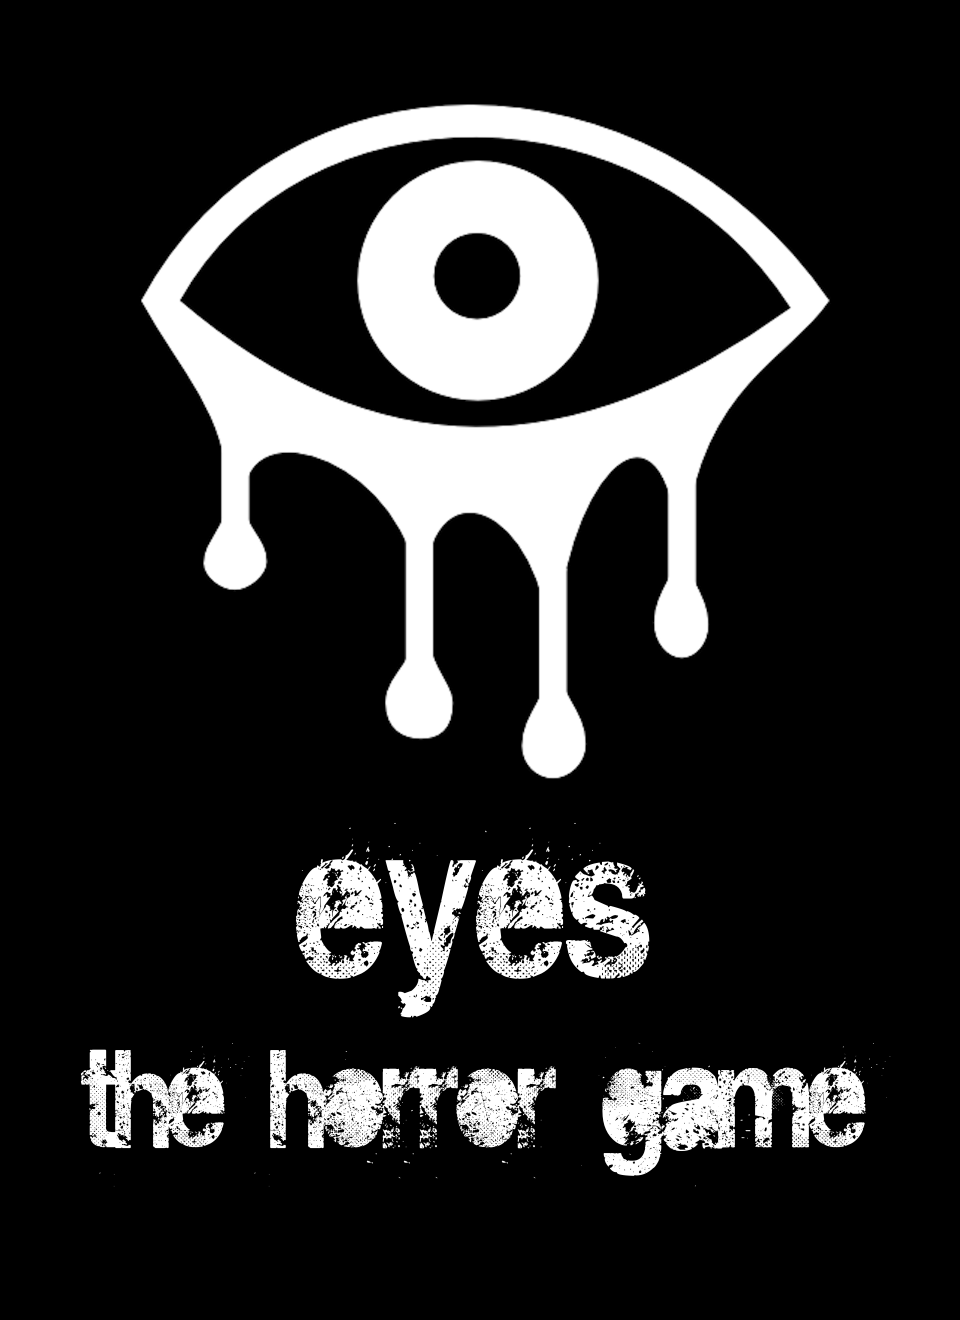 Eyes - the horror game, Software